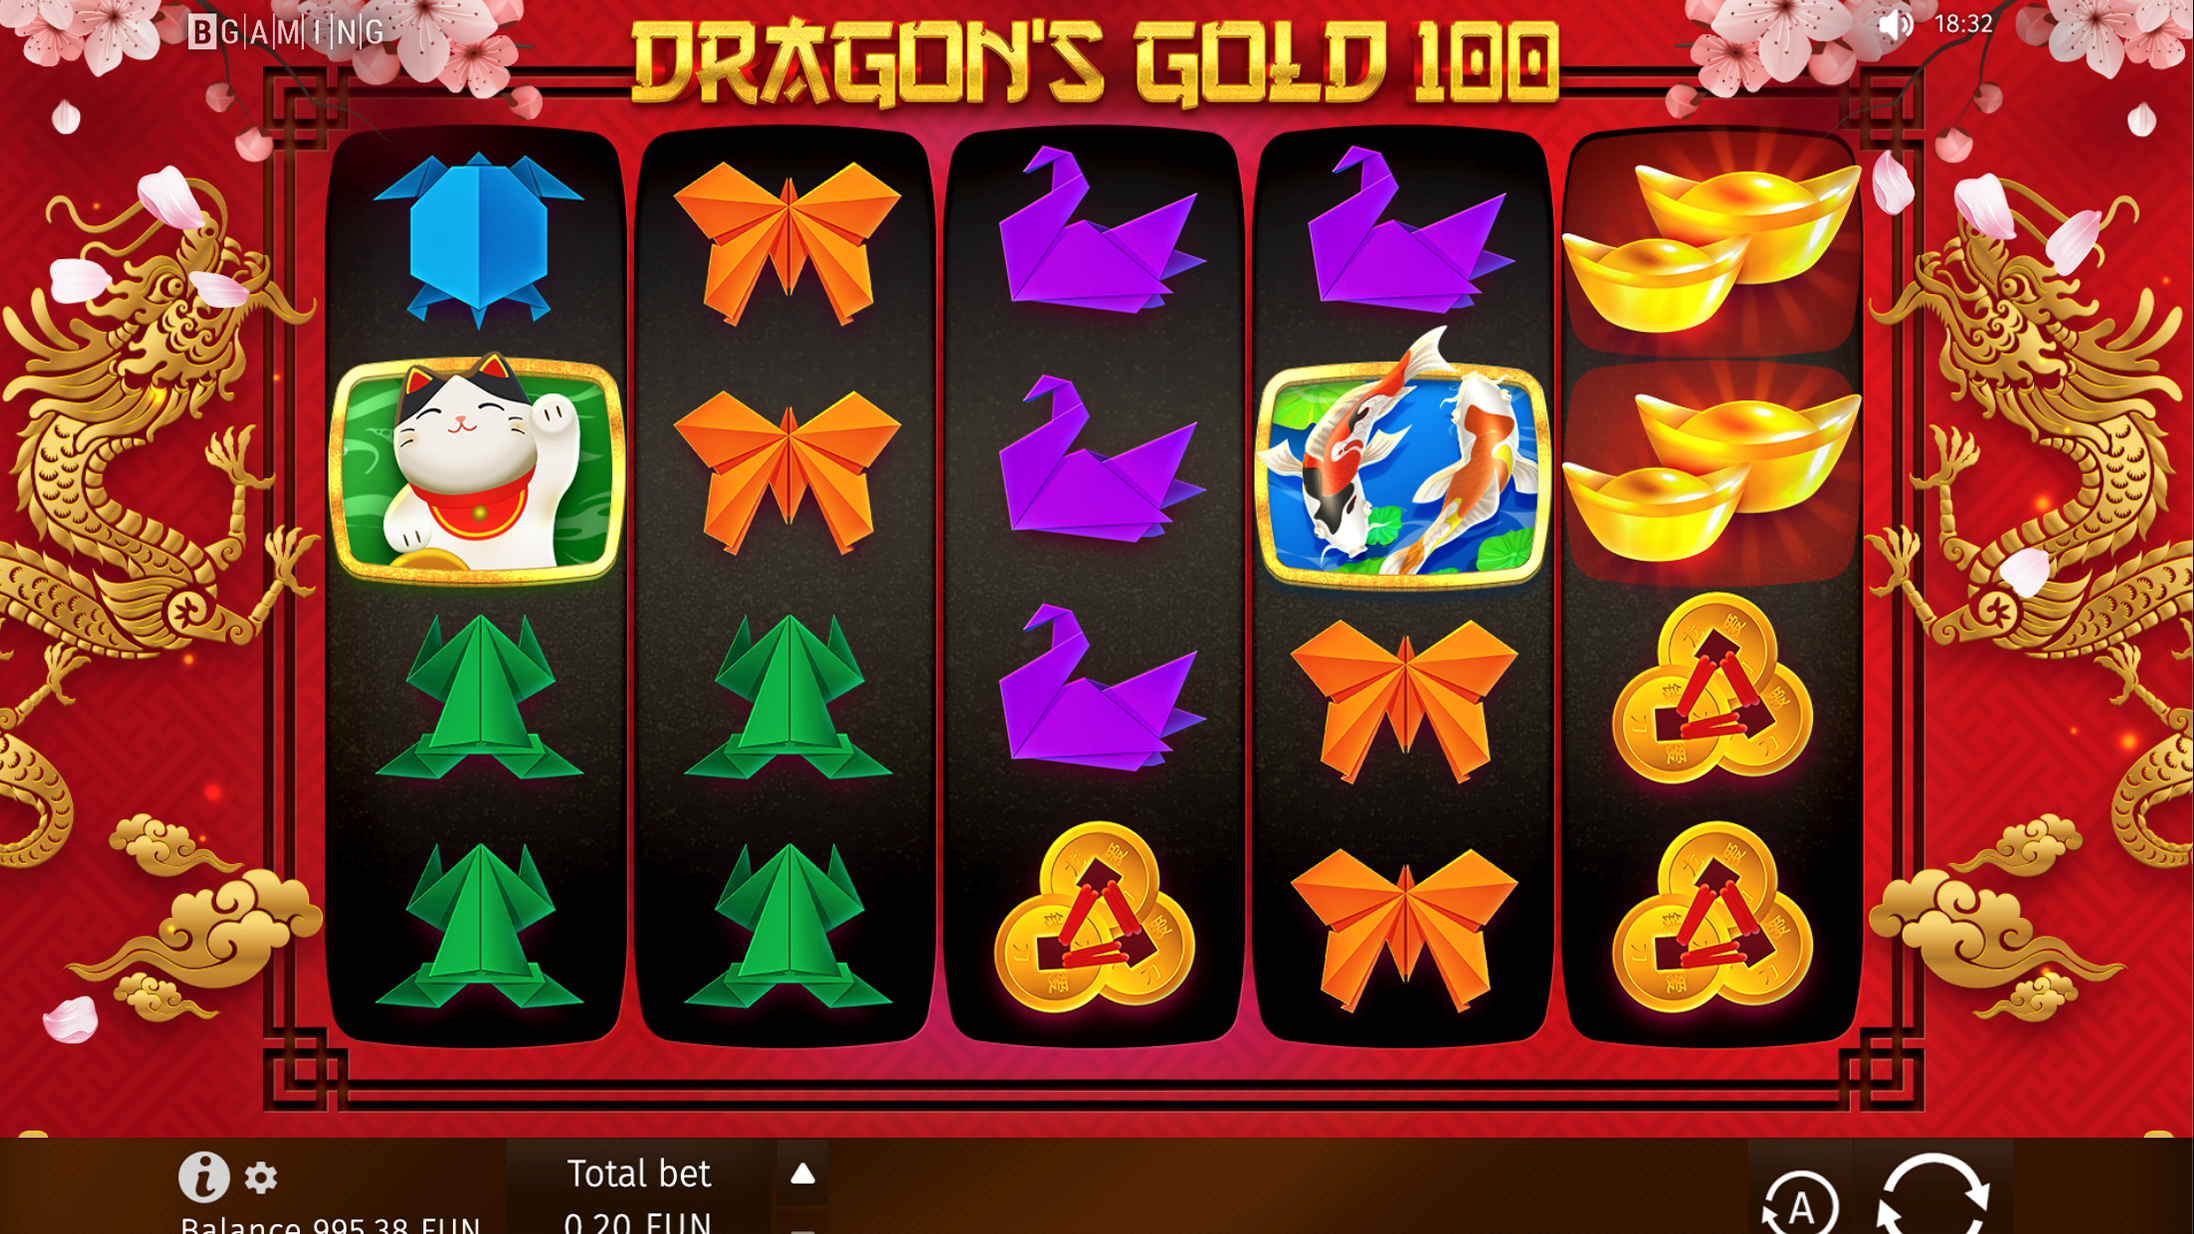 Inspired by Asian culture, BGaming’s most recent slot title Dragon’s Gold 100 takes players to the “mysterious East